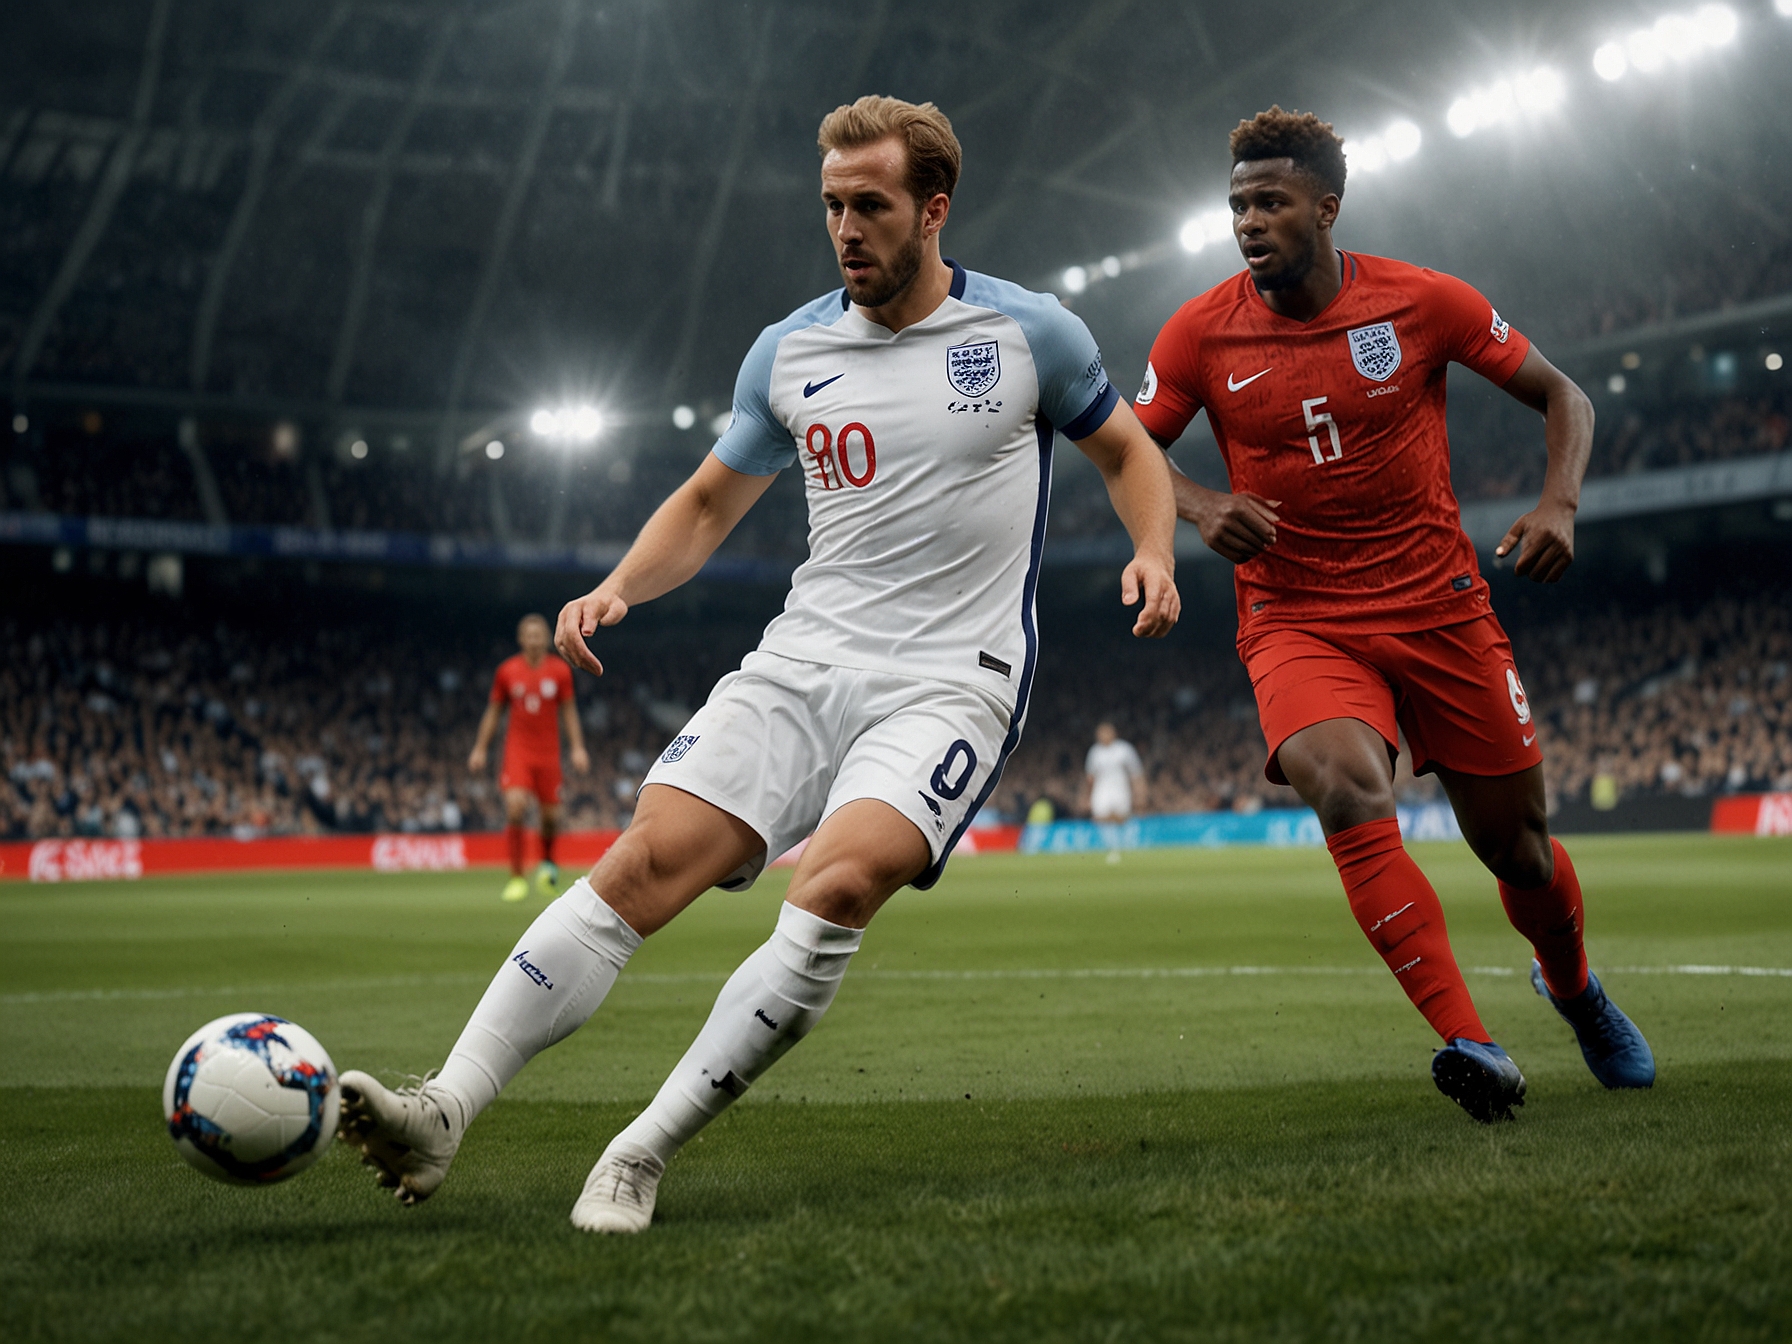 Harry Kane in action, shooting towards goal during a match, with intense focus. The image underscores his role as England’s leading goal-scorer.